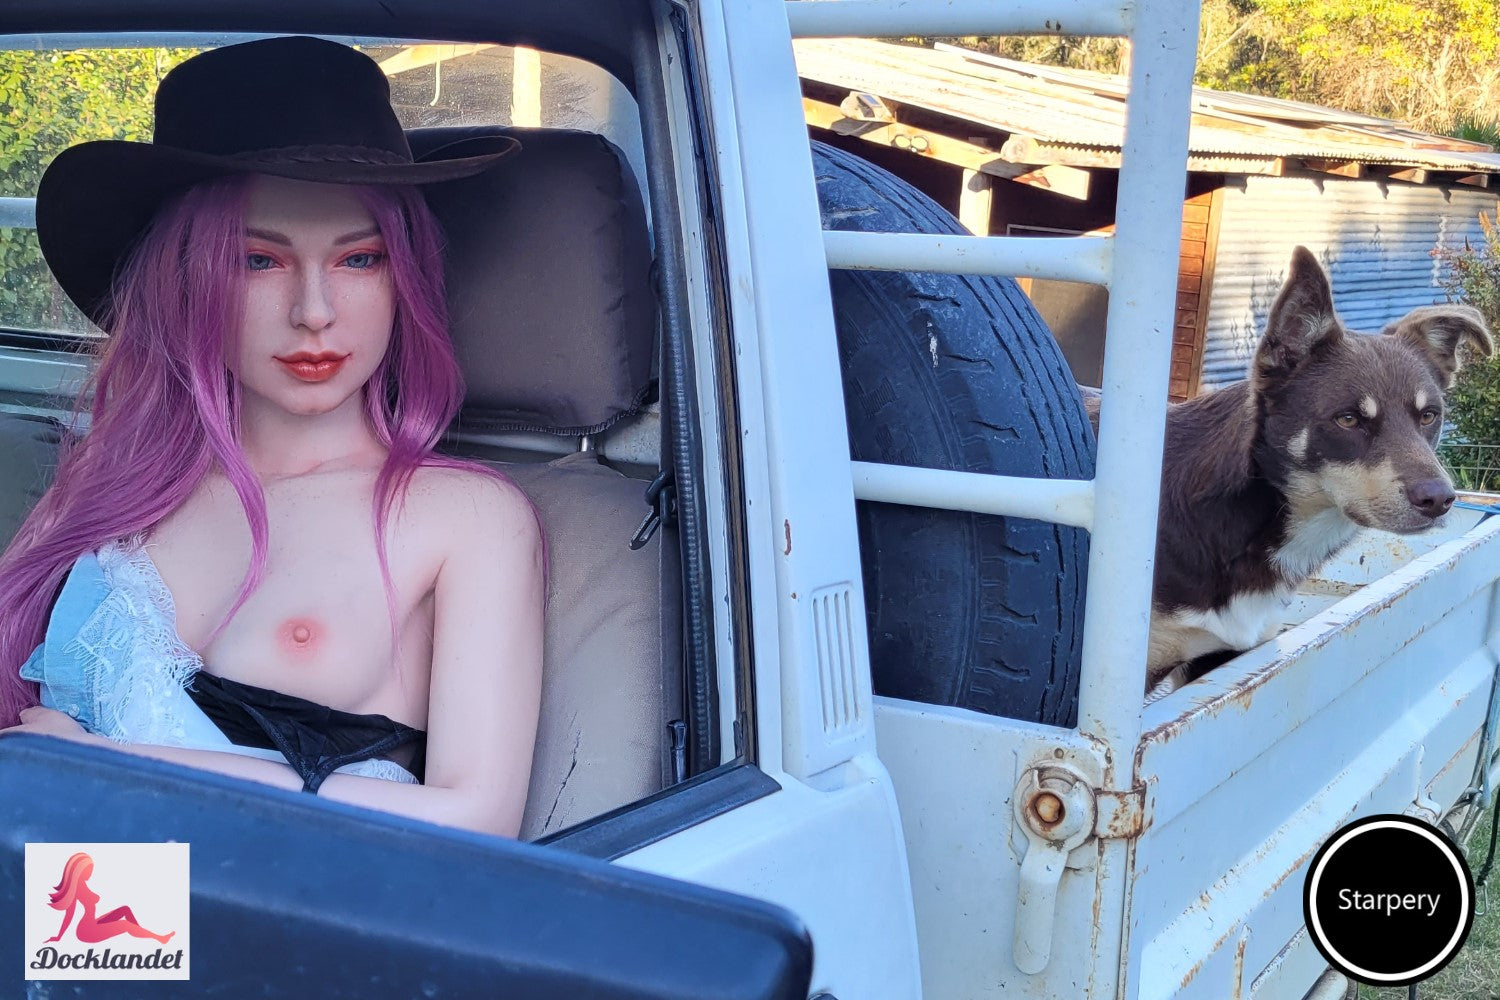 Starpery Queen 171cm A-cup sex doll. Pink hair real doll with small breasts and blue eyes. Sitting in a car with a cowboy hat and a dog. Docklandet stores in Sweden. Free delivery to the whole EU.